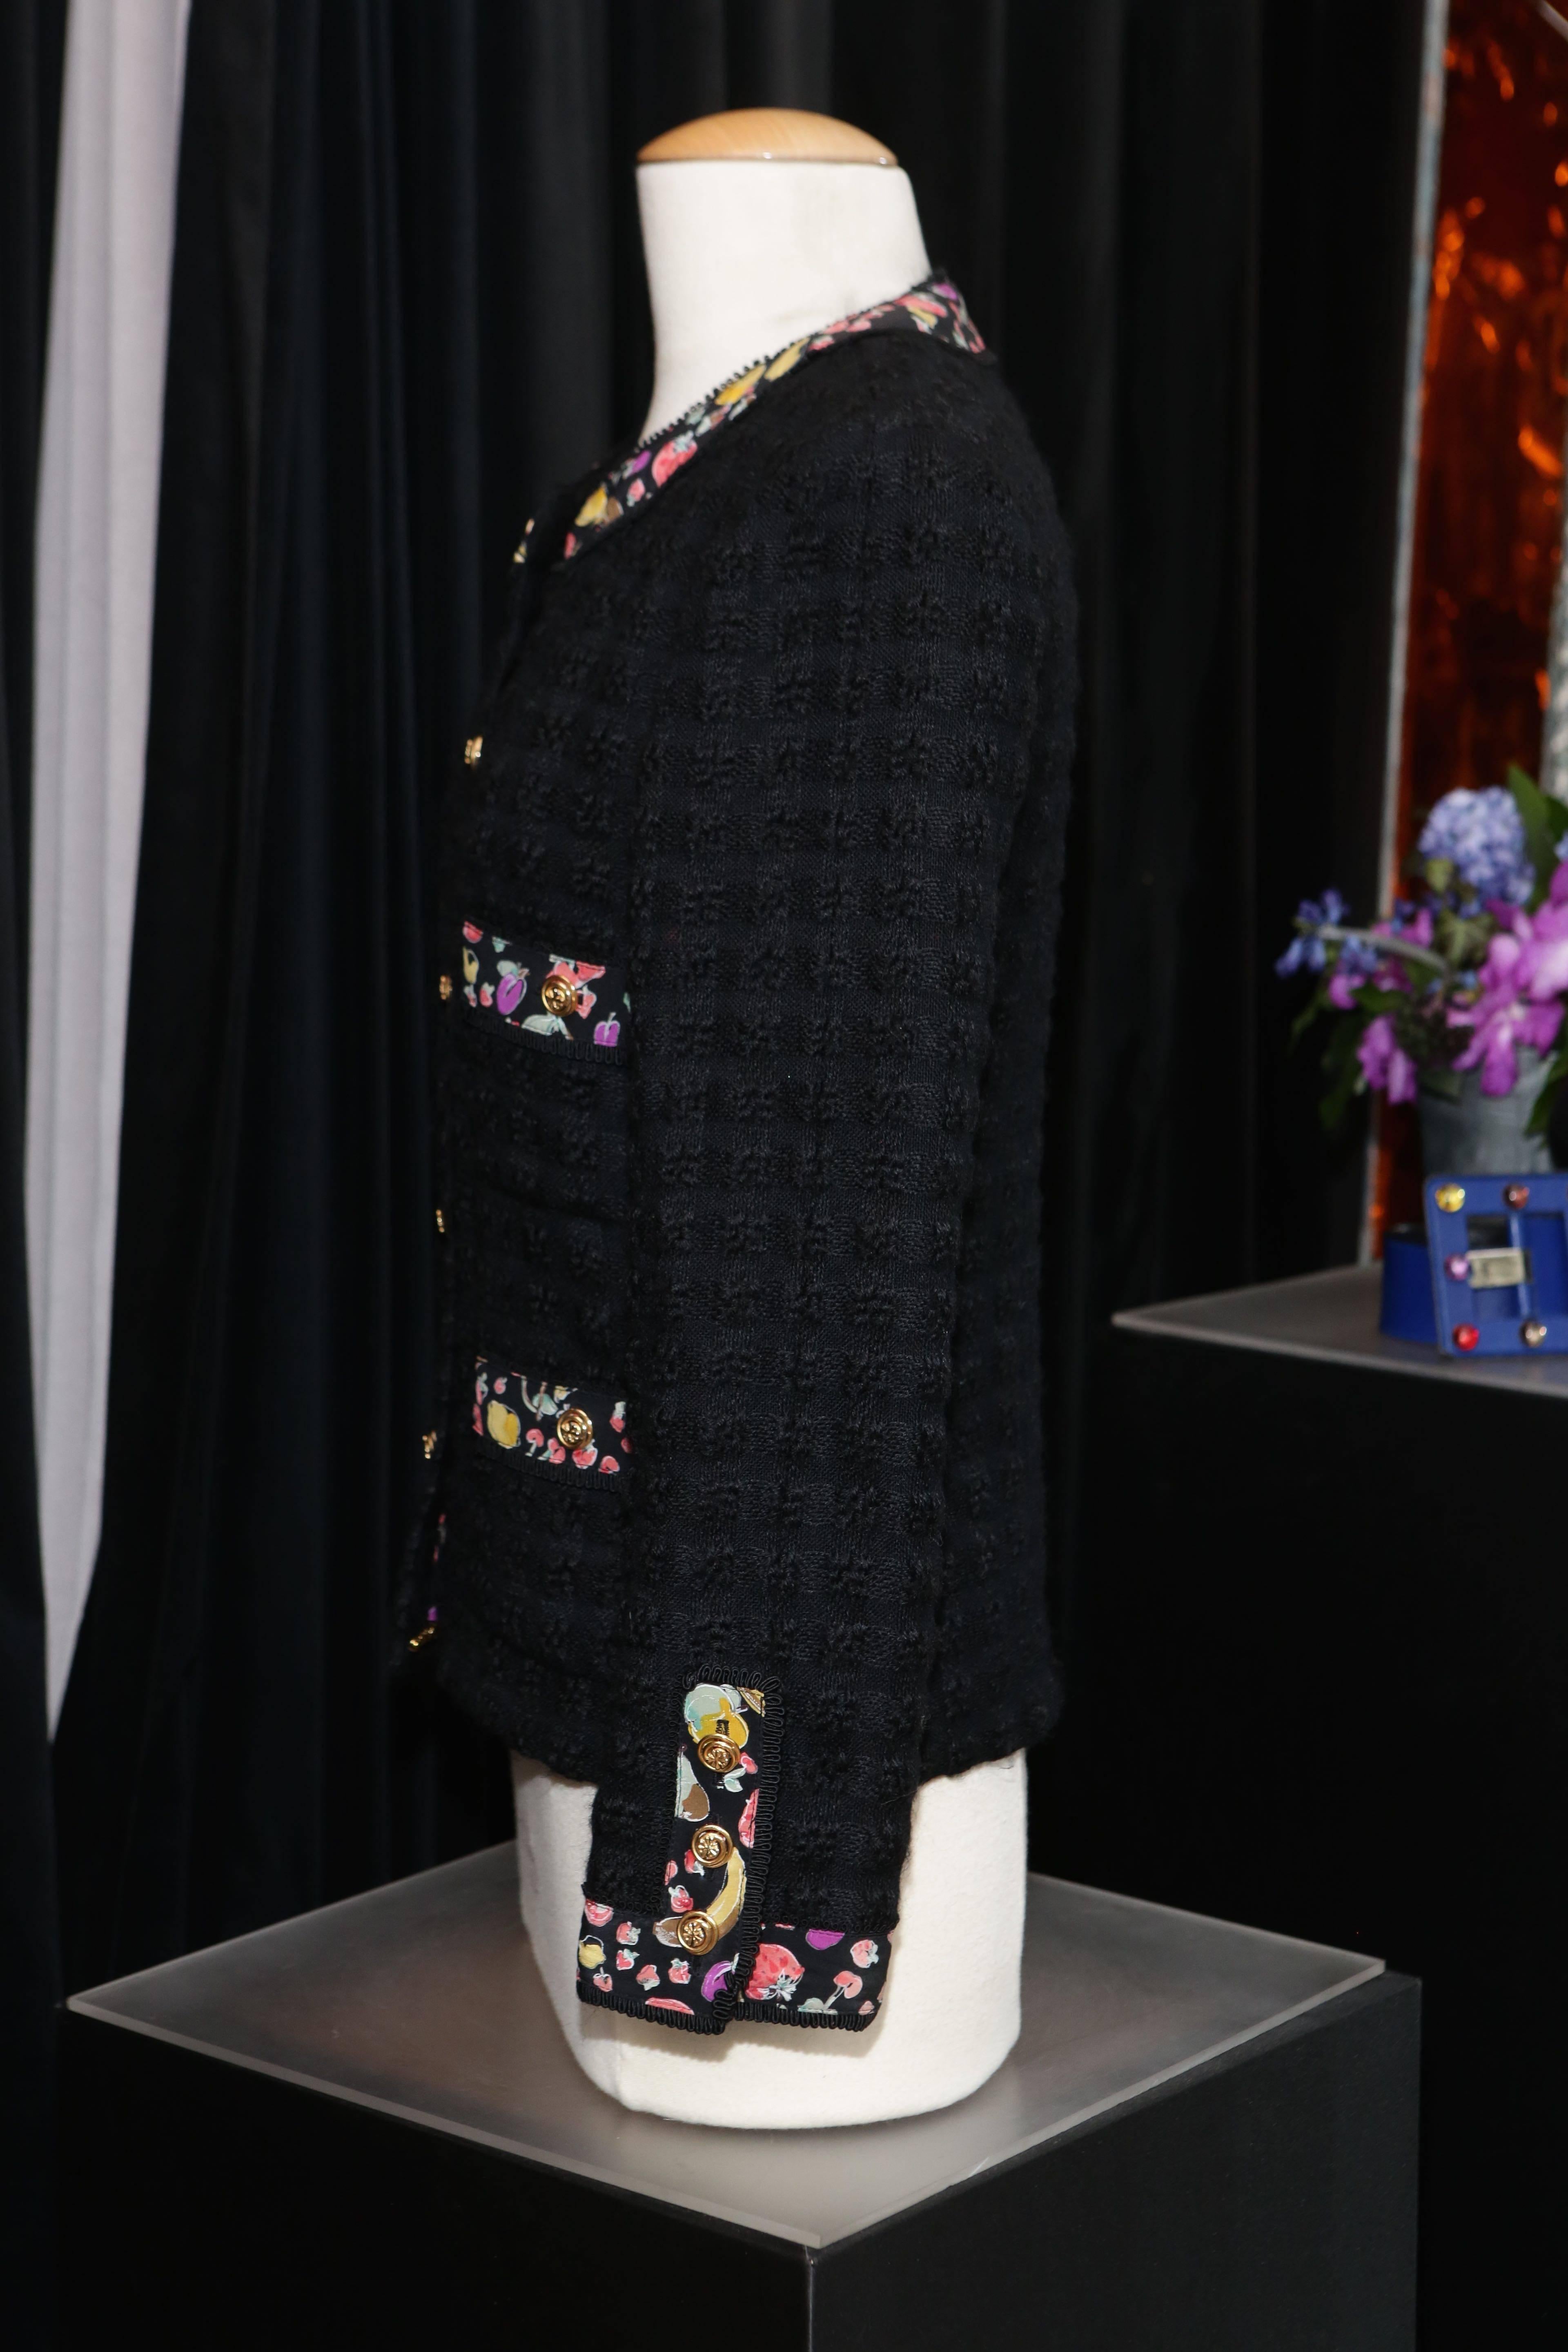 CHANEL BOUTIQUE Black tweed jacket adorned with a black silk galloons printed with colorful fruit pattern 

The galloons are displayed around the round neck, the lining, the cuffs and the four pockets. 
The jacket features also gold-tone metal